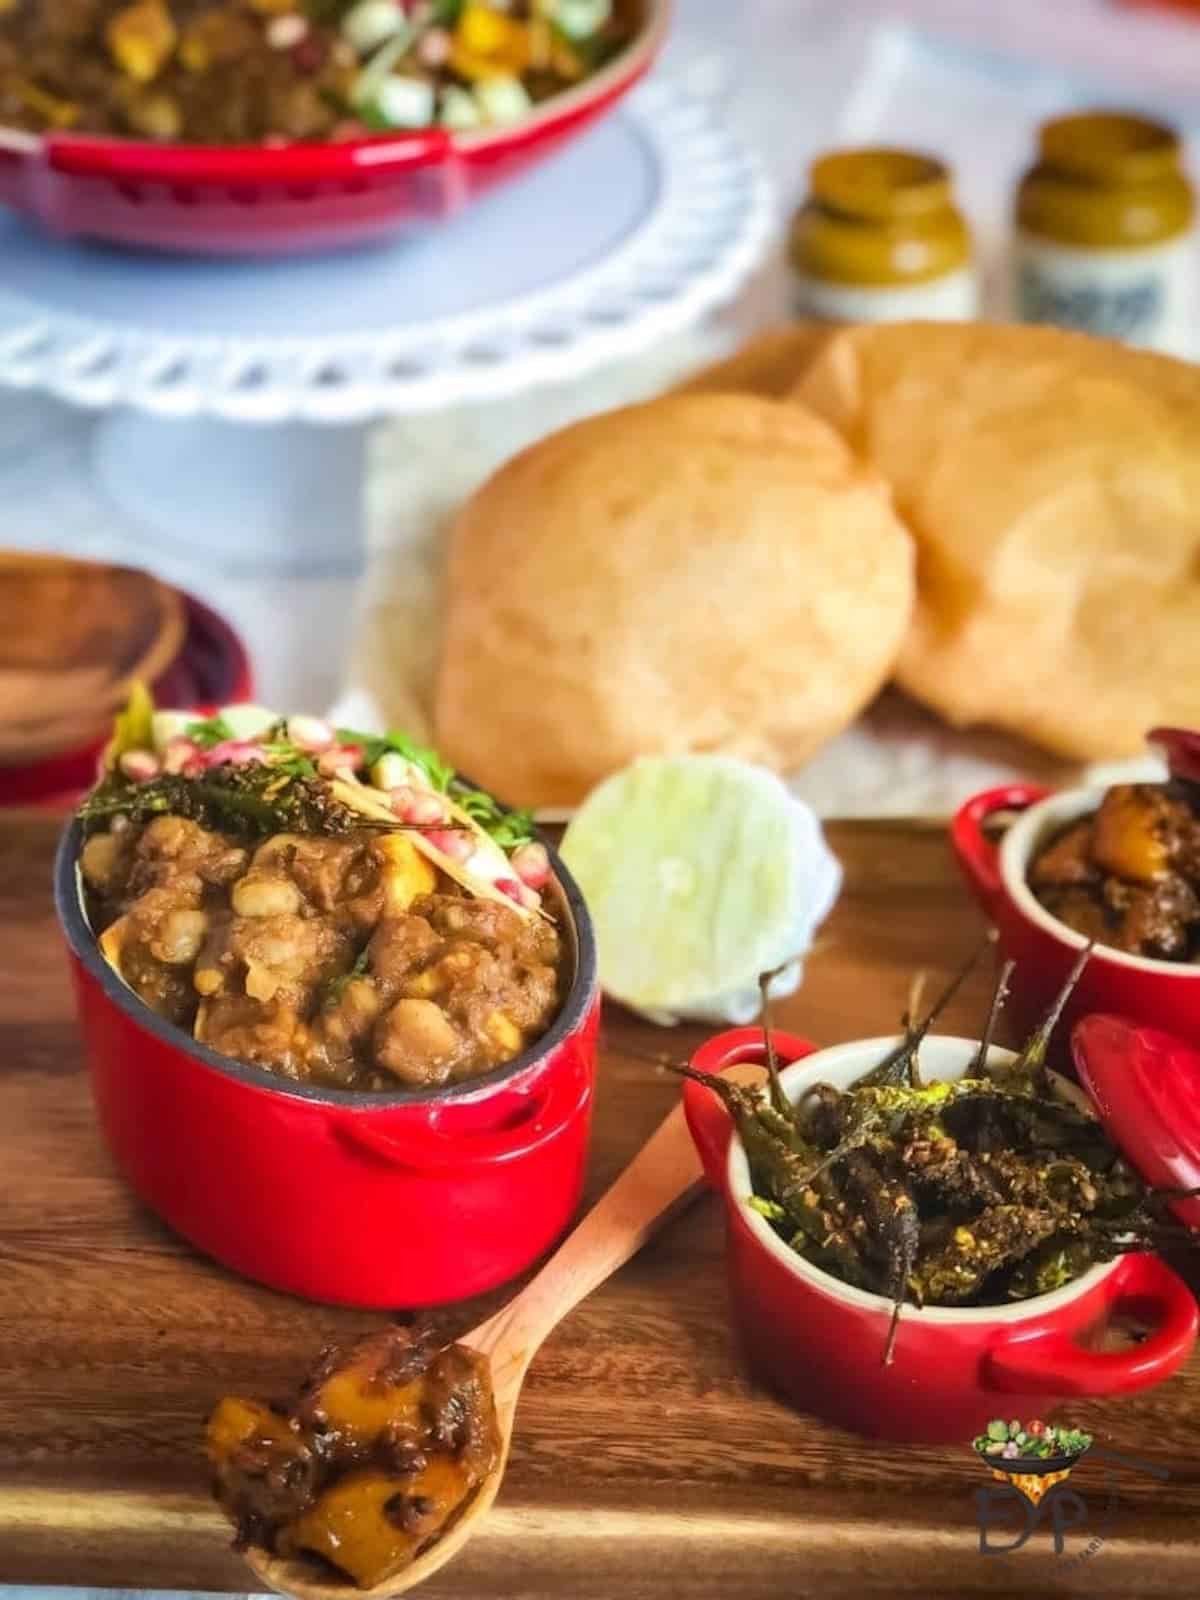 Chickpea and potato curry in a red container.